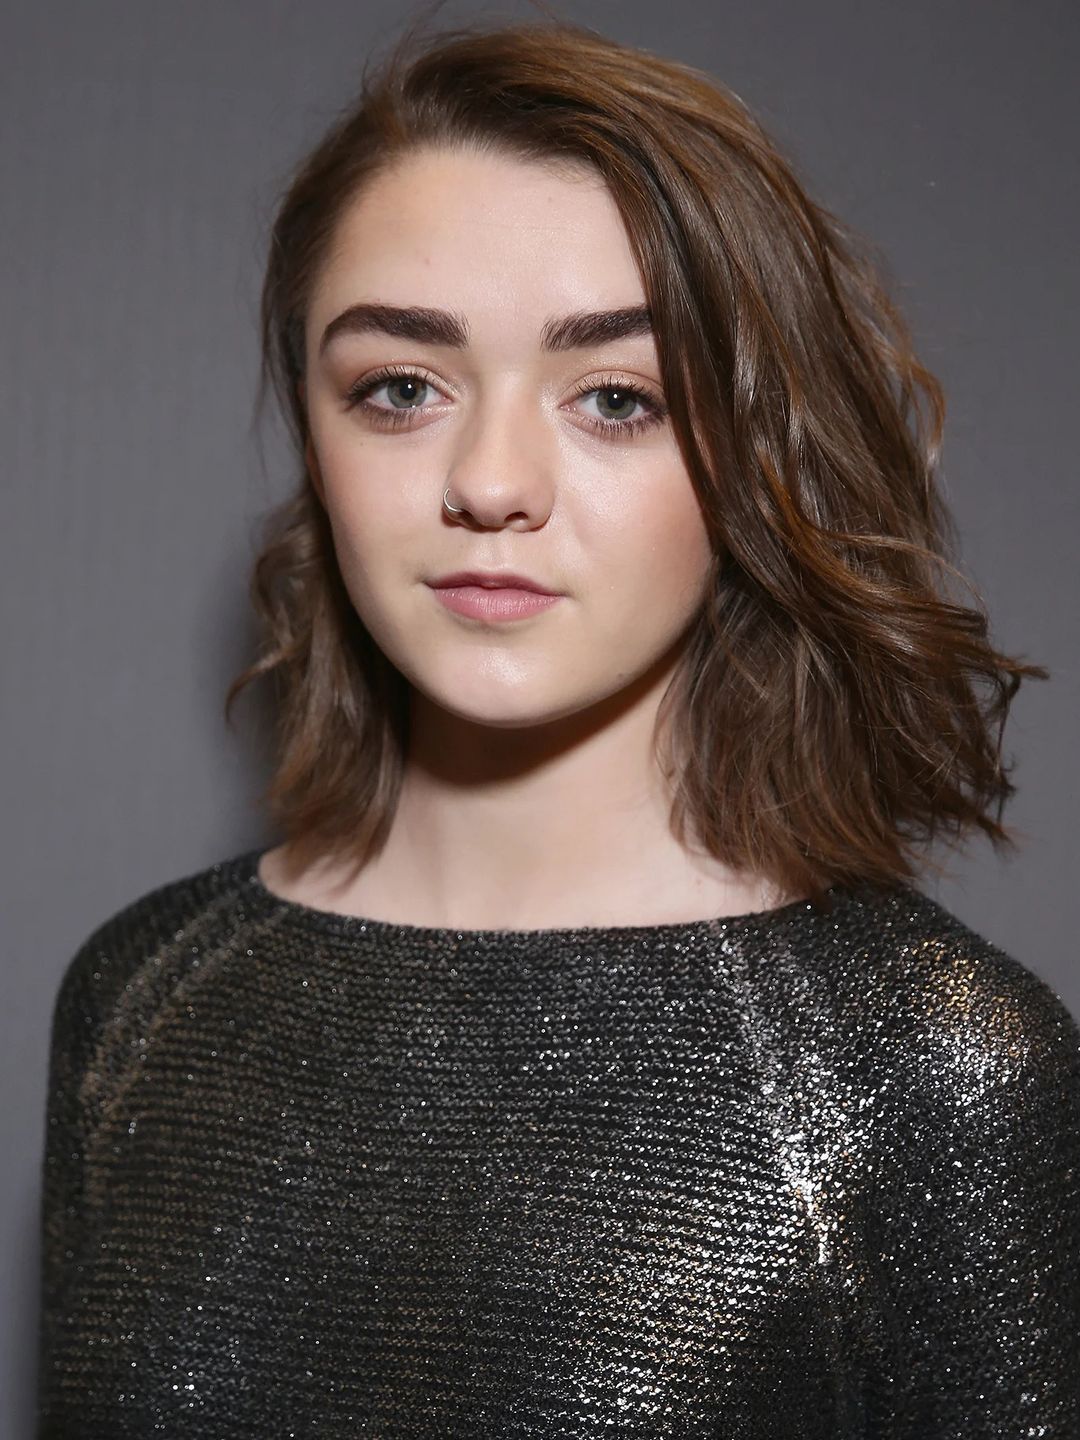 Maisie Williams unphotoshopped pictures